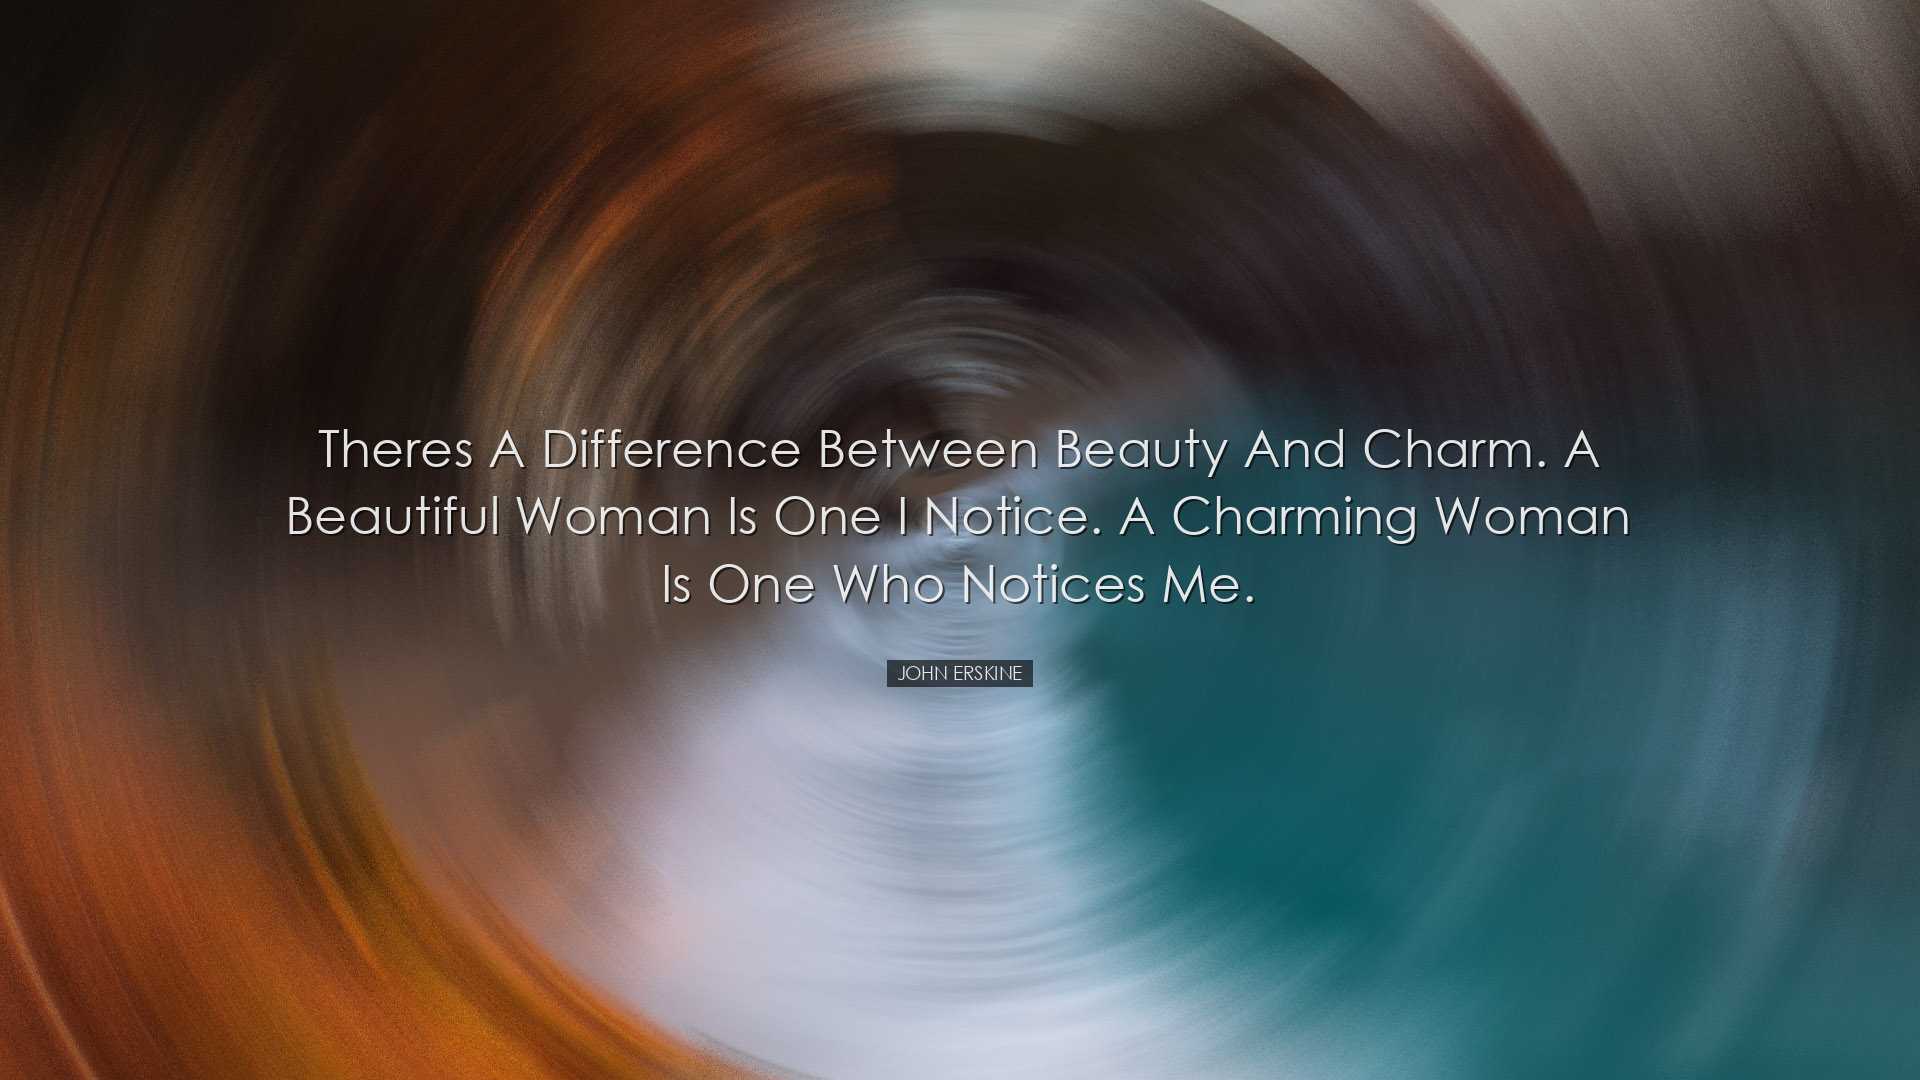 Theres a difference between beauty and charm. A beautiful woman is